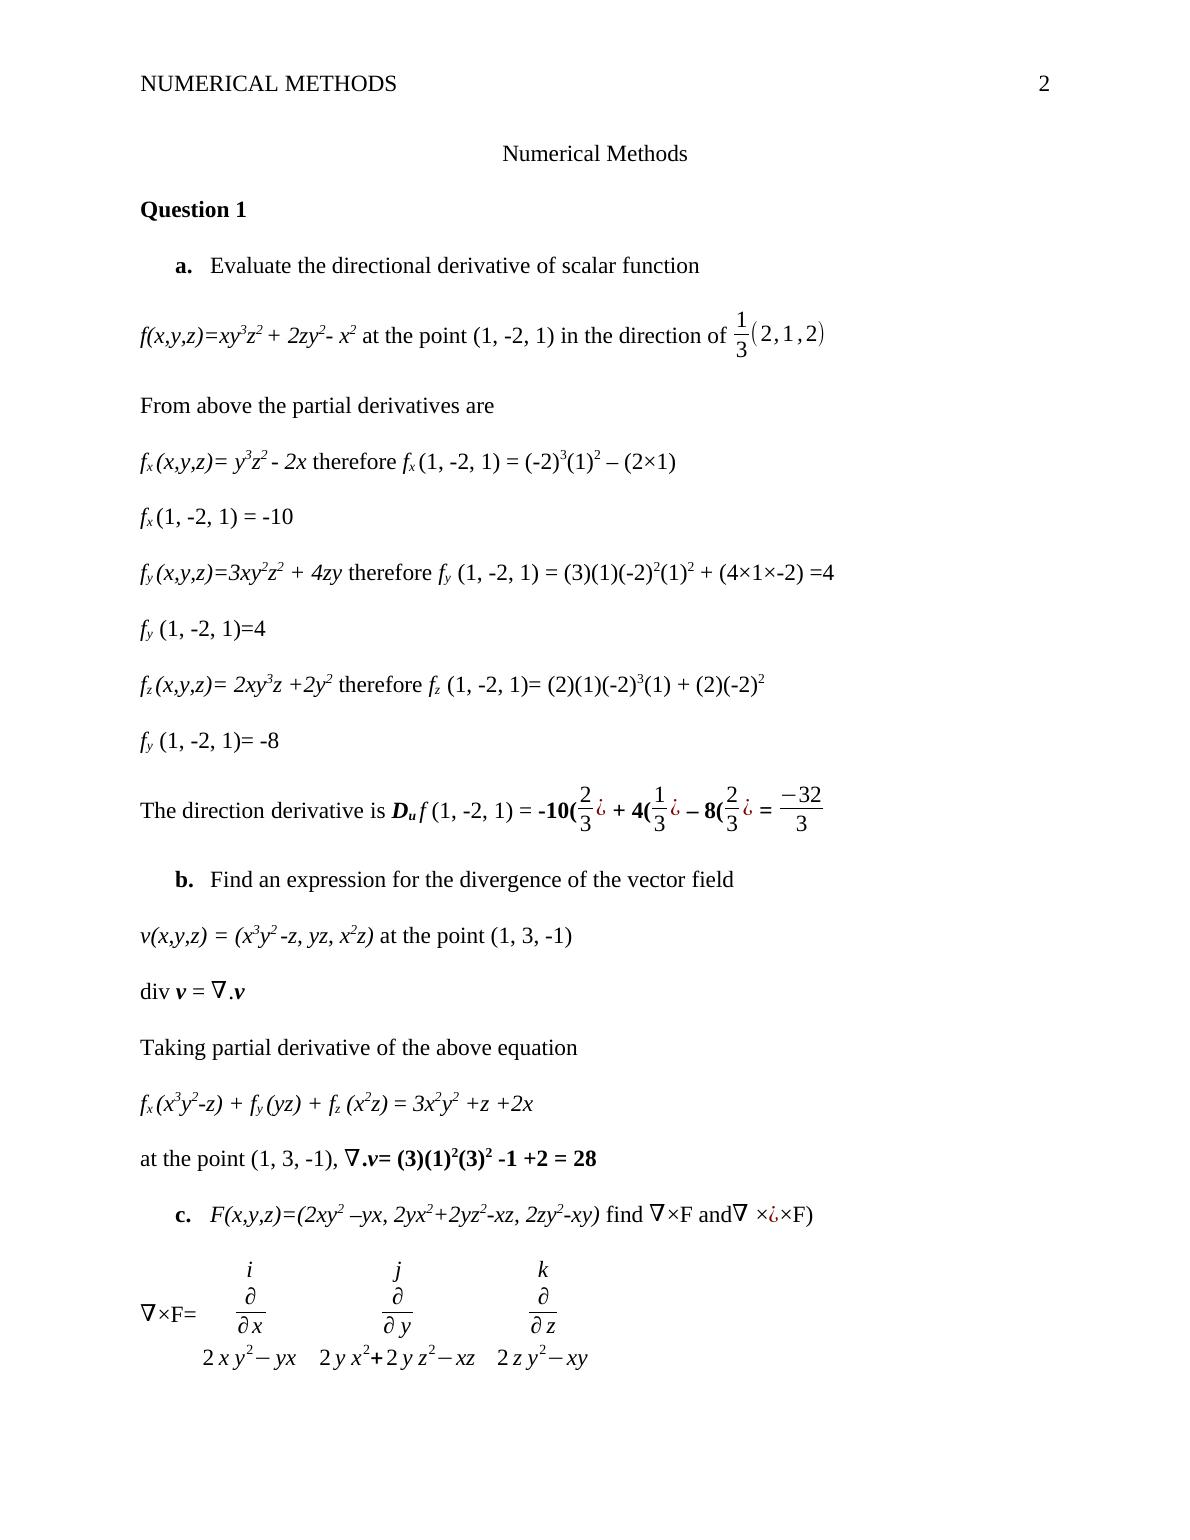 Assignment on Numerical Methods_2